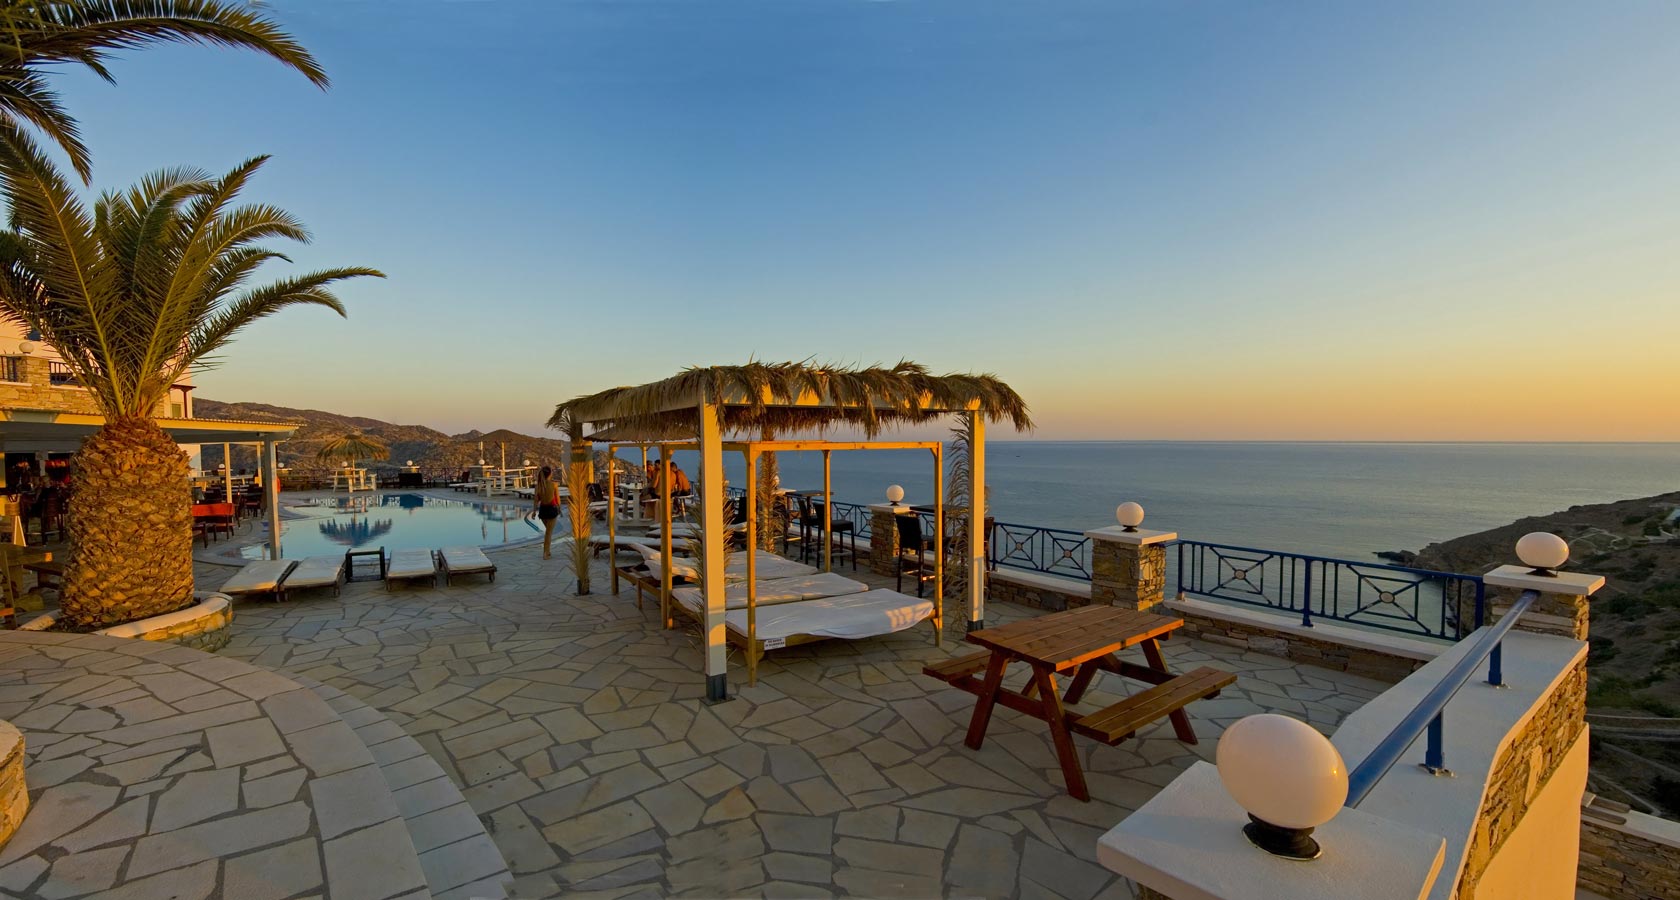 The Sea View of Hermes in Ios island Greece - Ios Accommodation